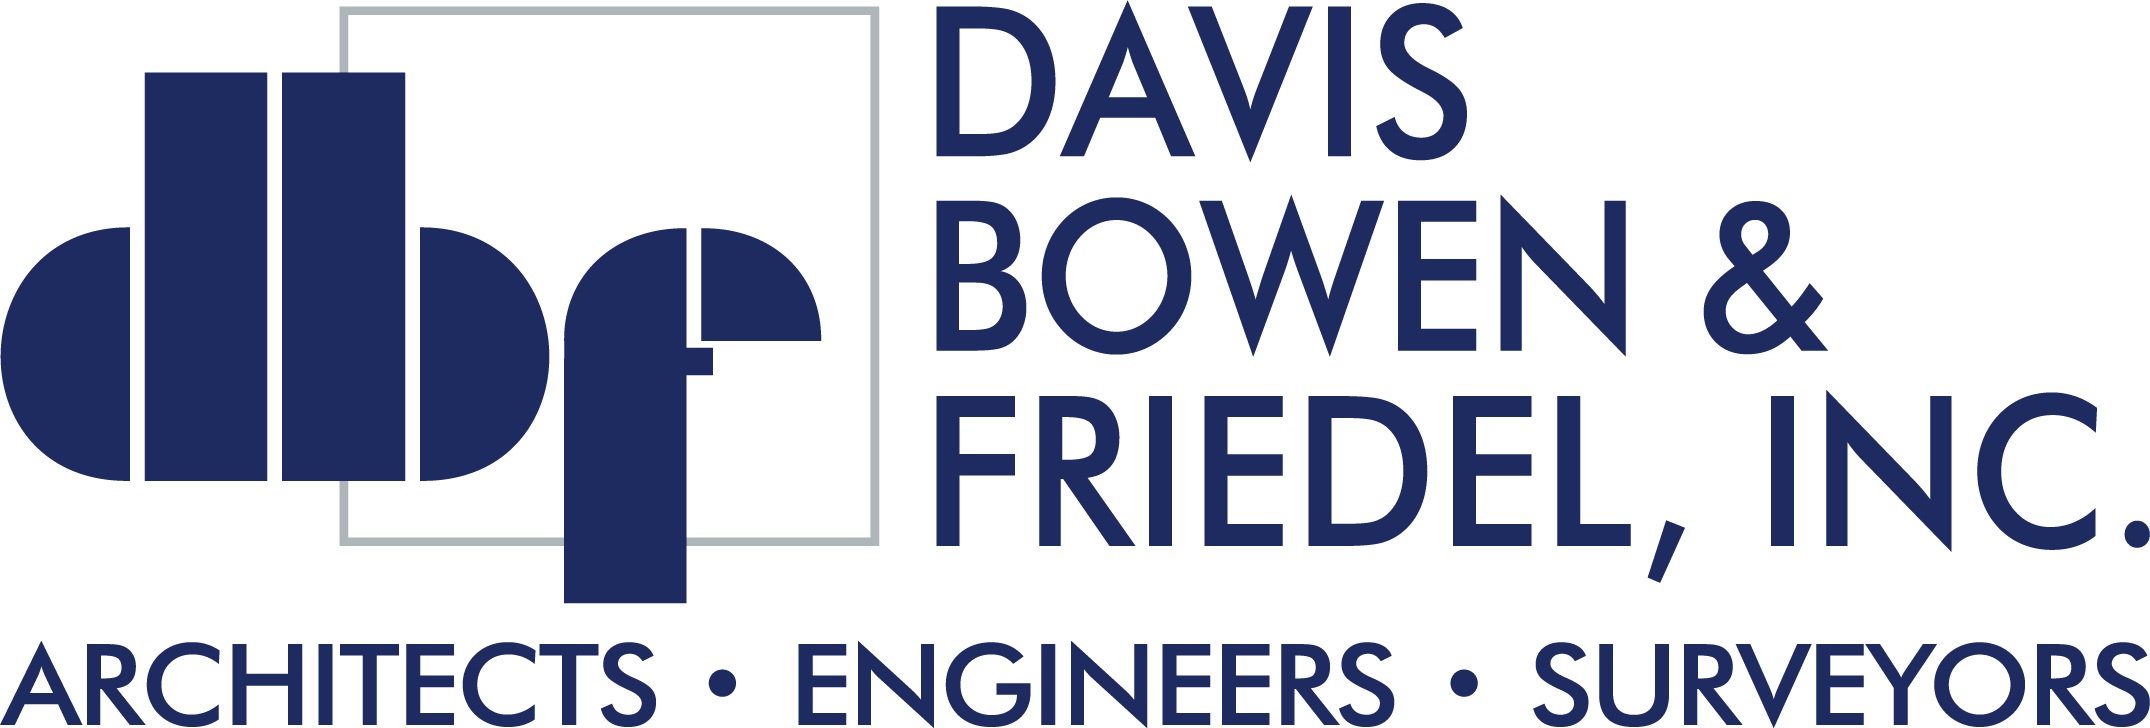 DBF Logo - AES 2022.png